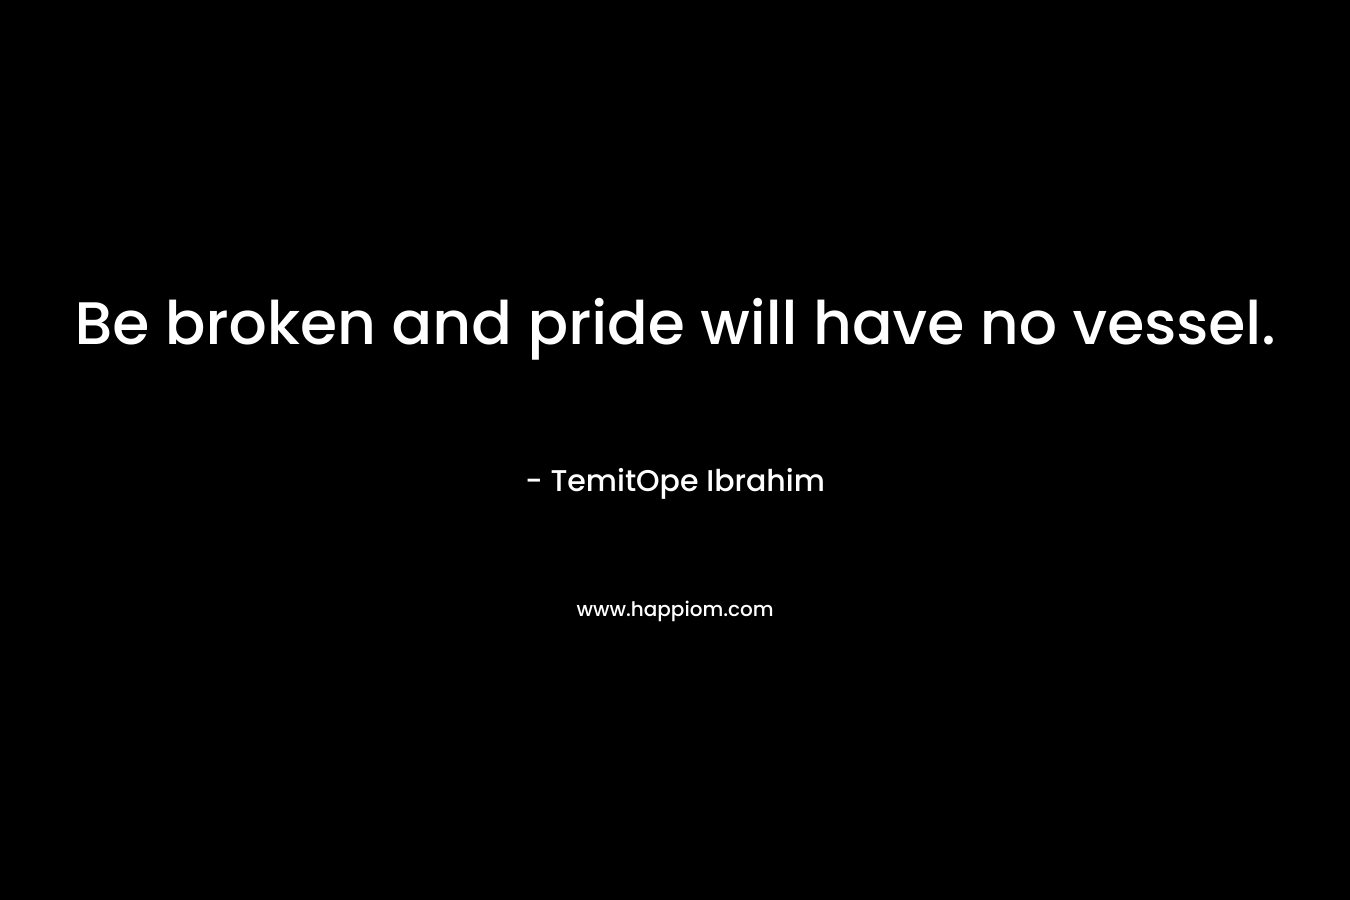 Be broken and pride will have no vessel. – TemitOpe Ibrahim